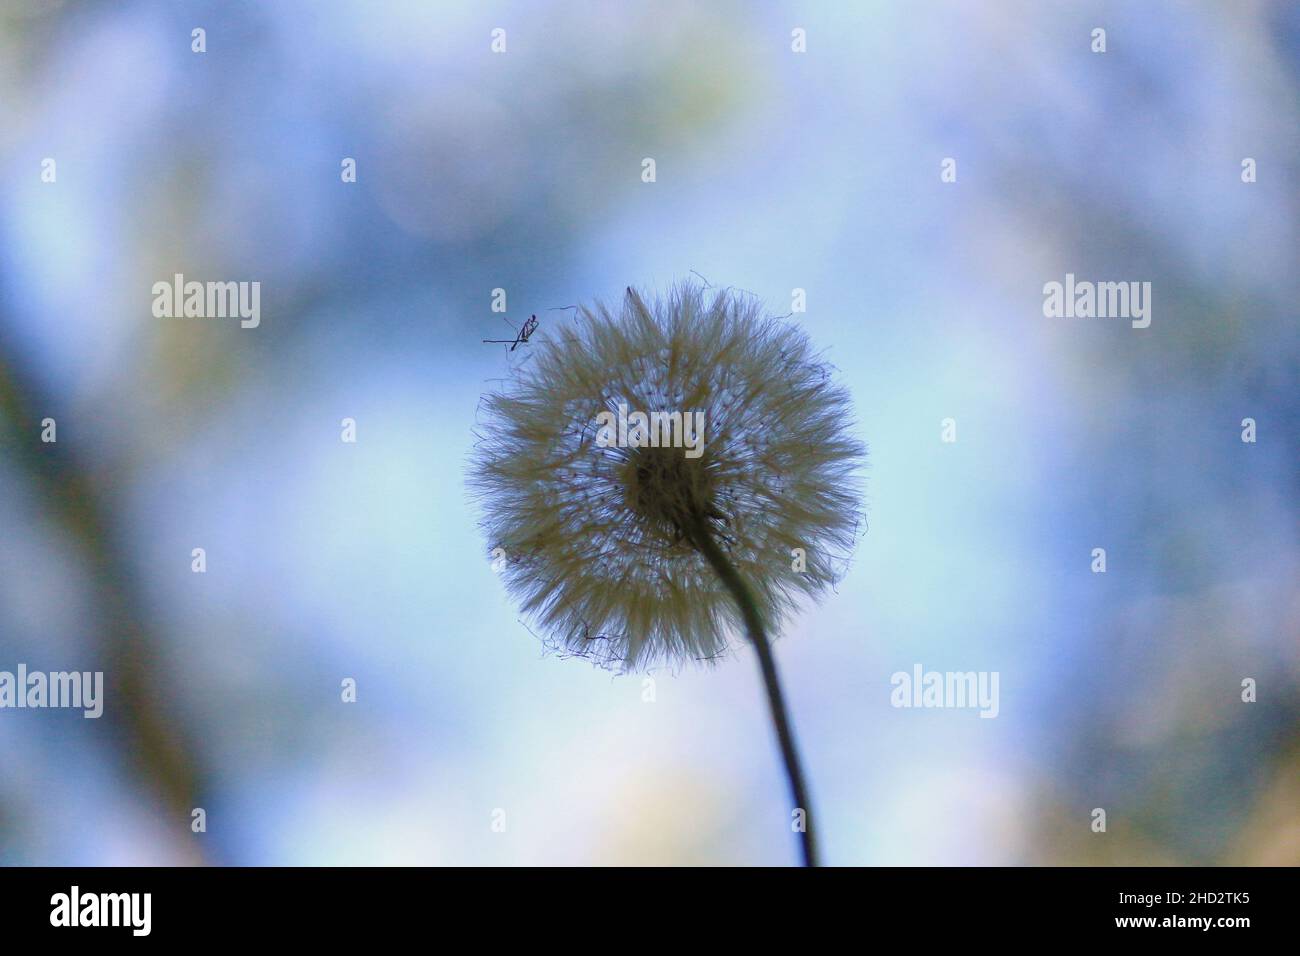 The Dandelion flower has the meaning of freedom, optimism, hope and spiritual light. Stock Photo